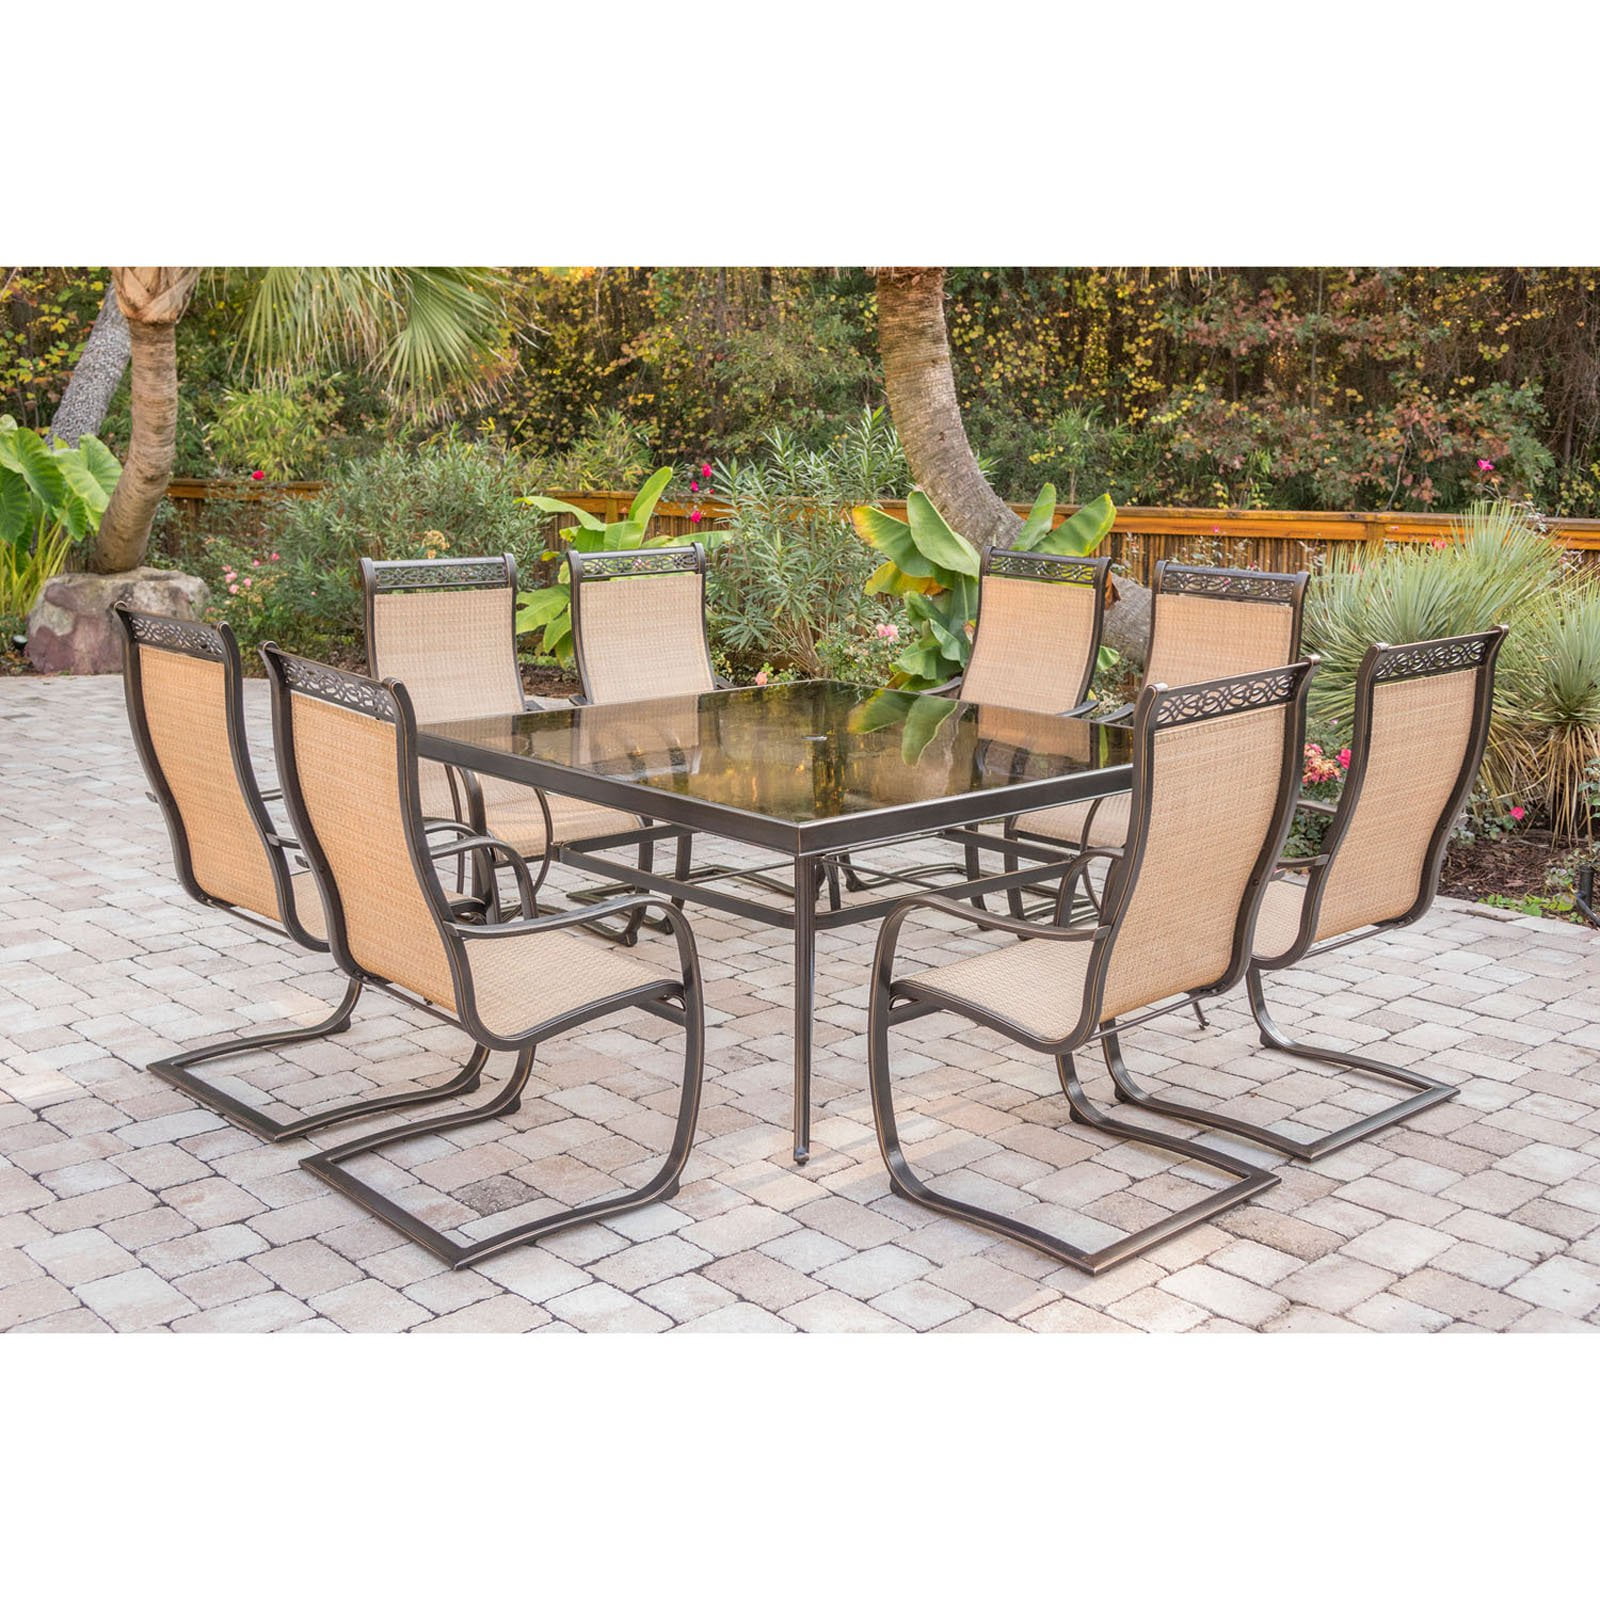 Outdoor Monaco 9 Piece Sling Dining Set, Outdoor Glass Top Table And Chairs Set